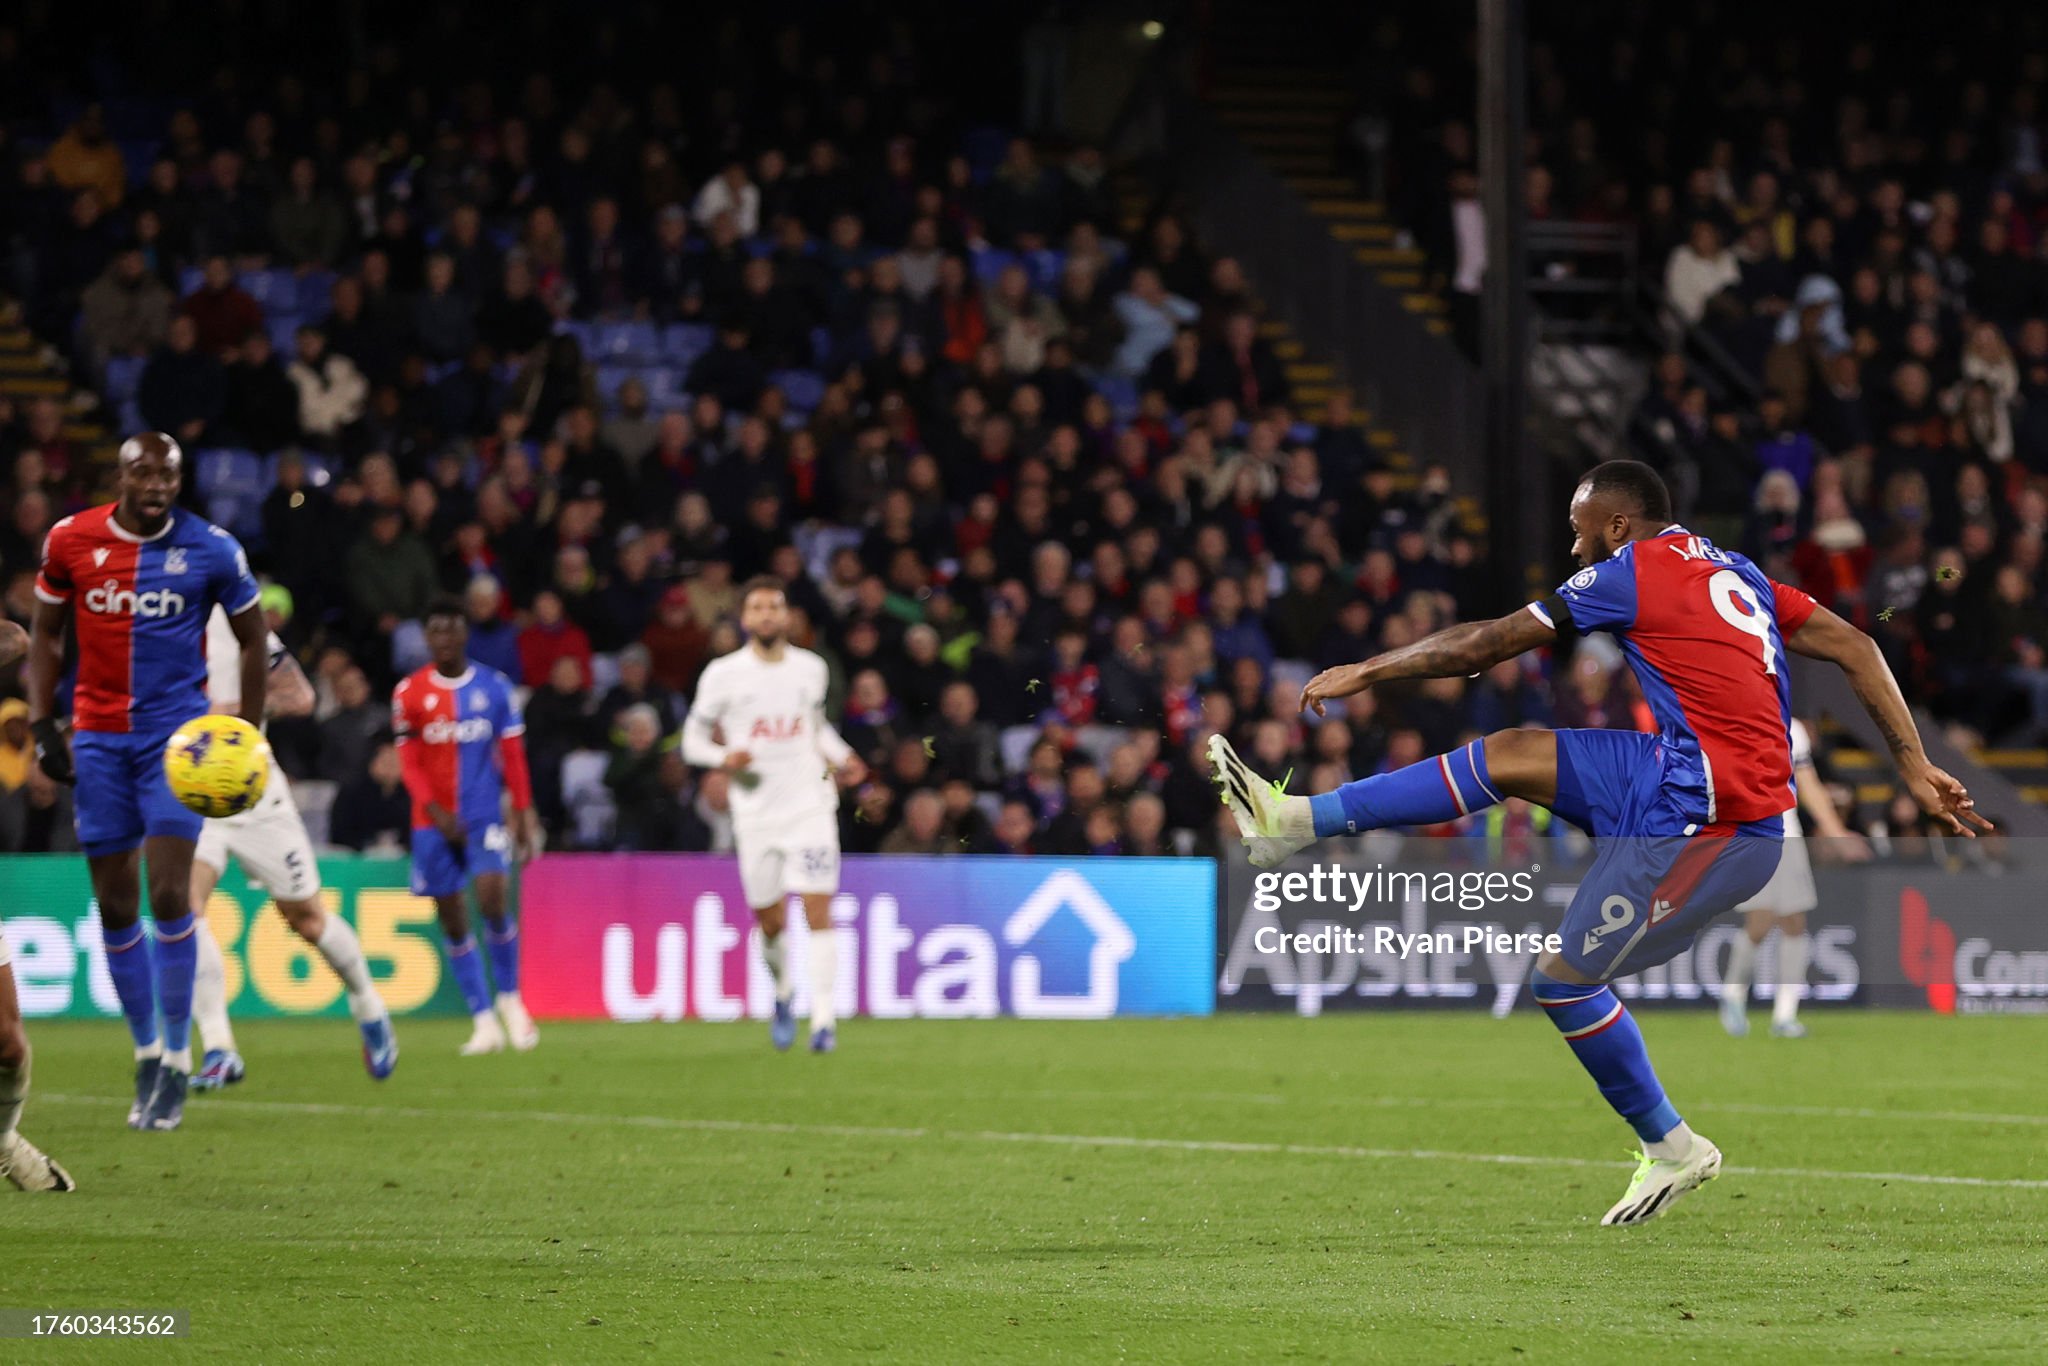 Jordan Ayew produces Man of the Match Award worthy numbers in Palace win